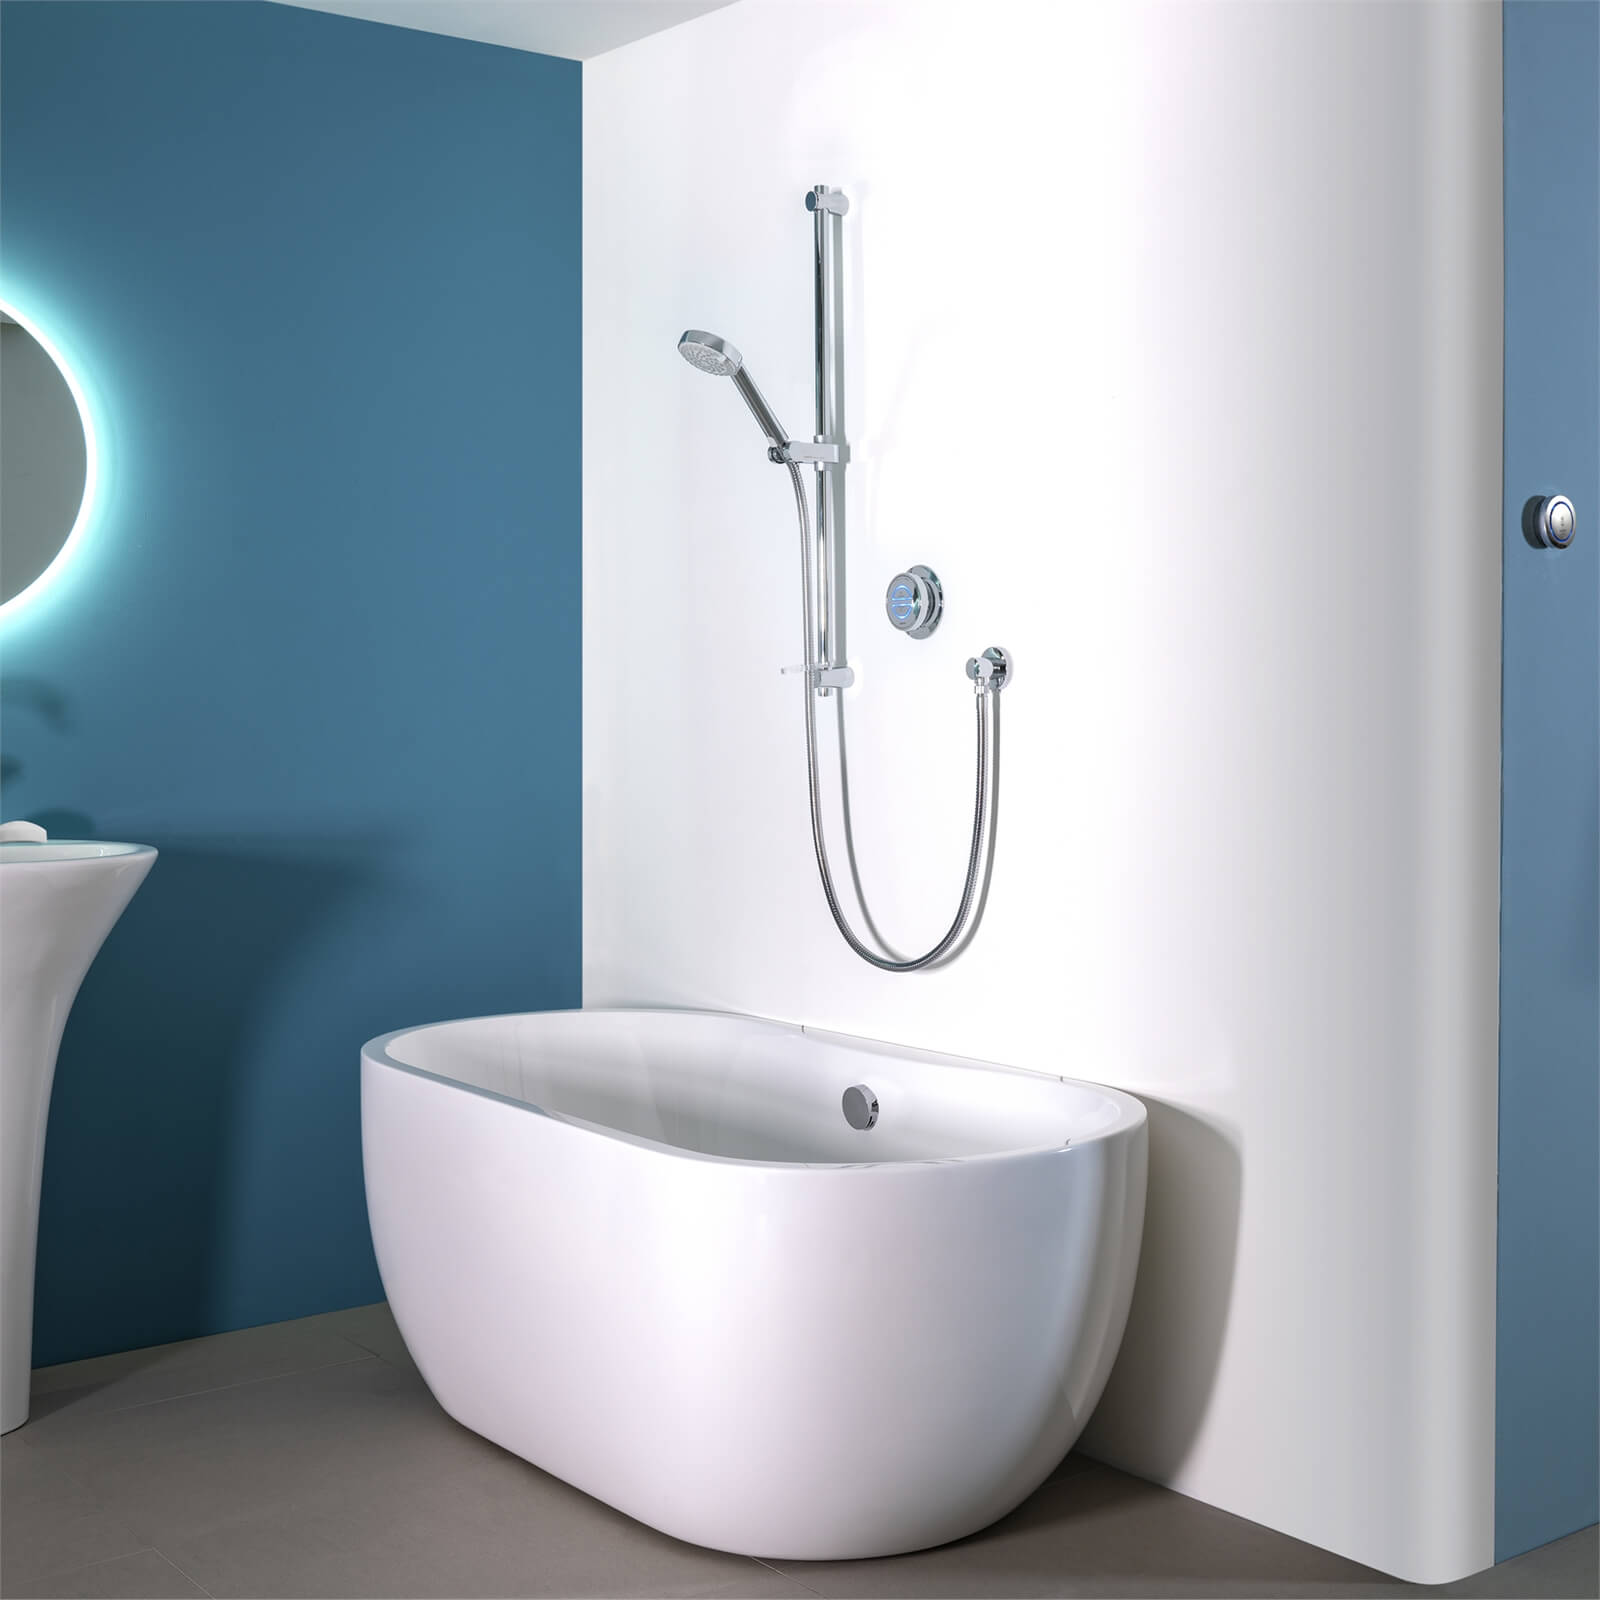 Aqualisa Quartz Concealed with Adustable Head and Bath Filler - High Pressure/Combi